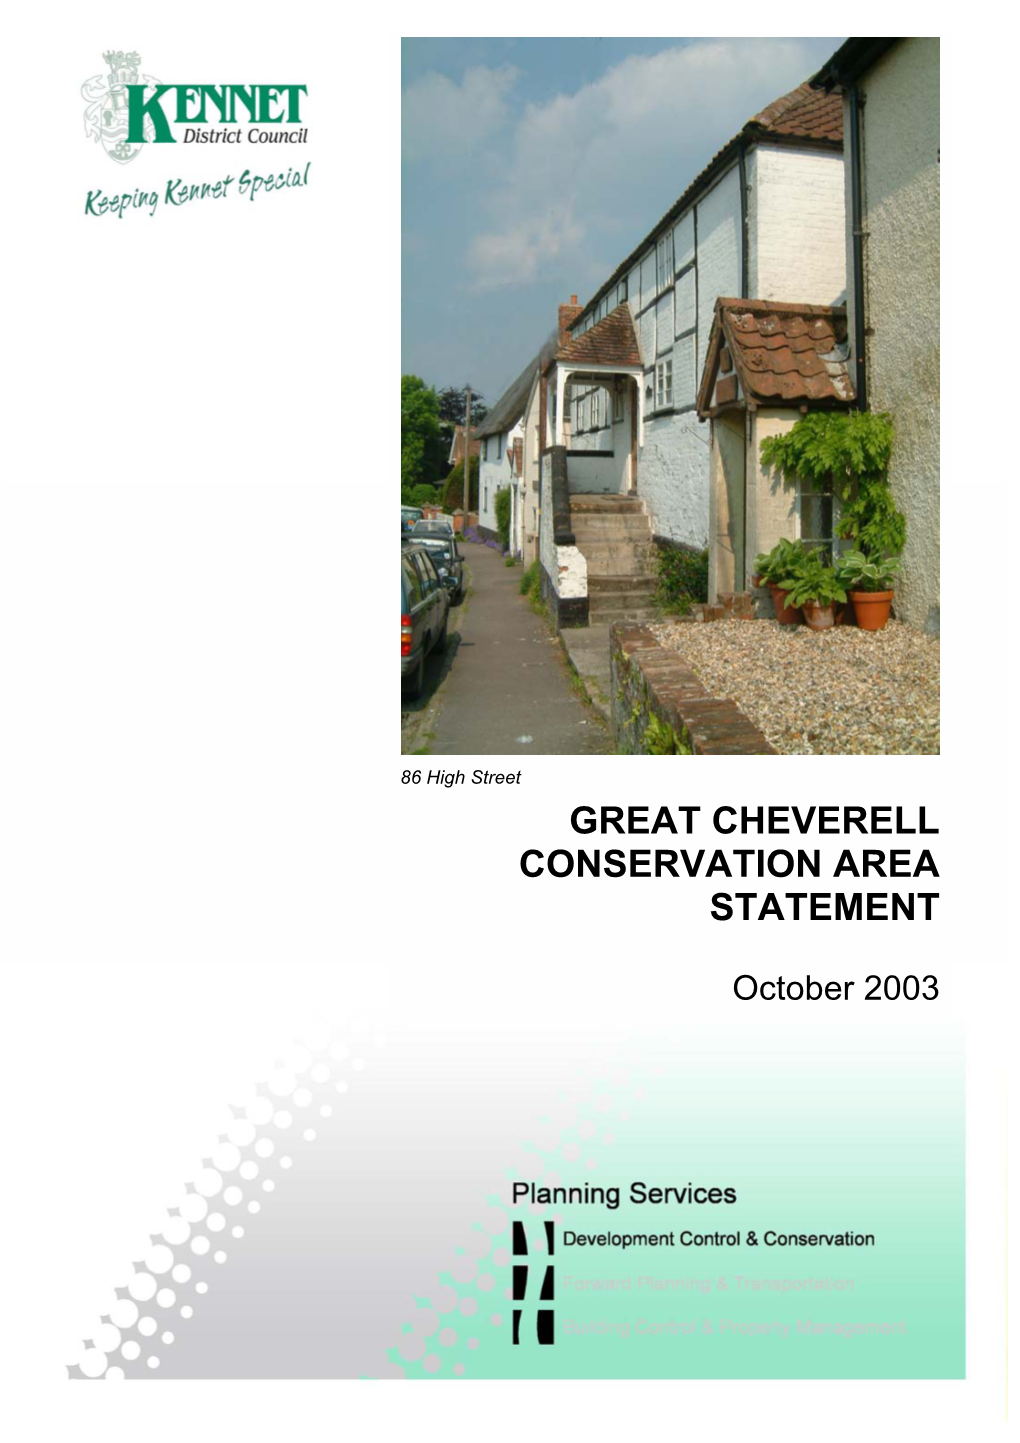 Great Cheverell Conservation Area Statement Is Part of the Process